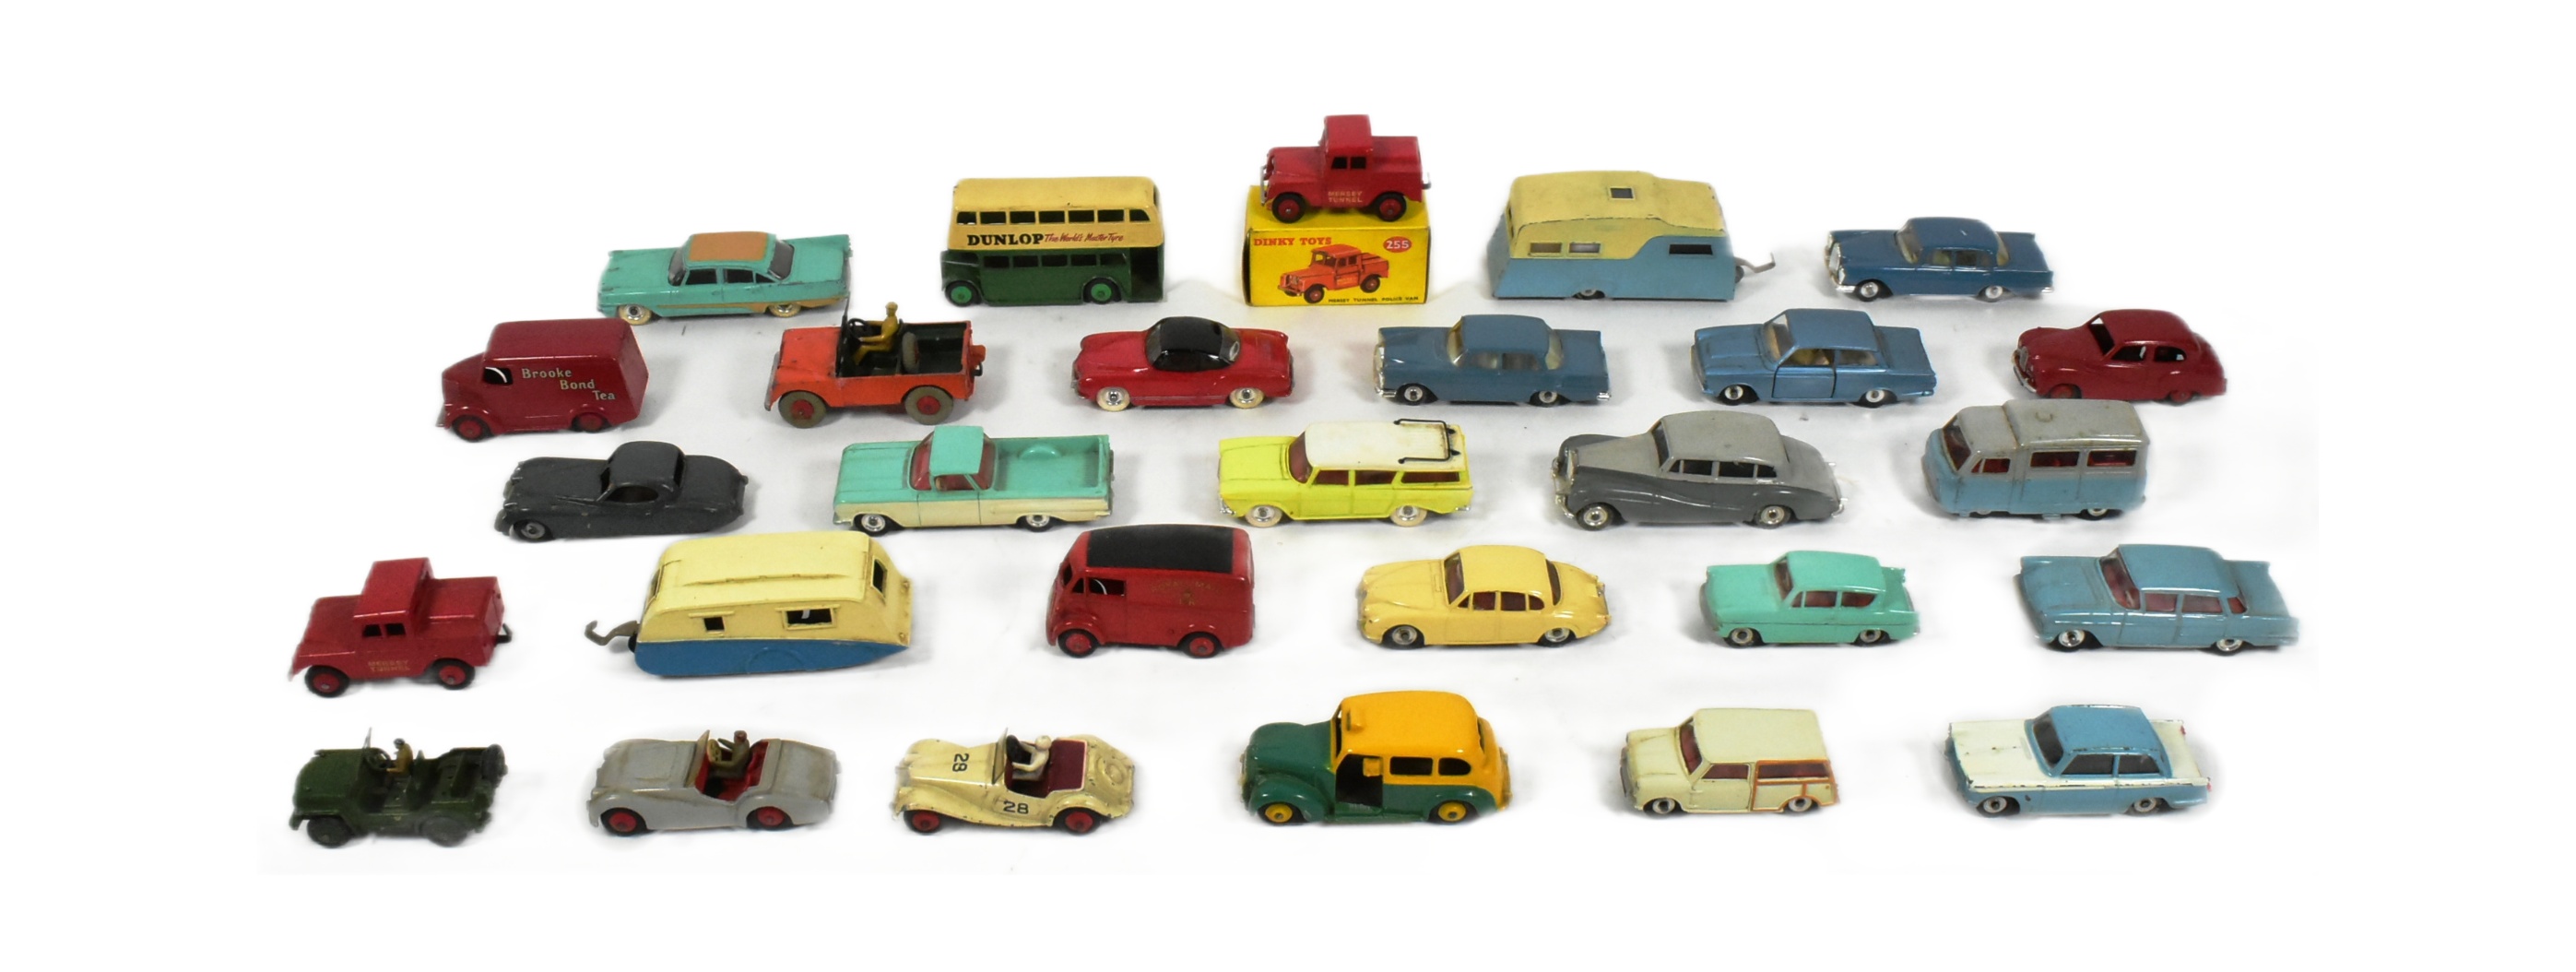 DIECAST - COLLECTION OF VINTAGE DINKY TOYS DIECAST MODELS